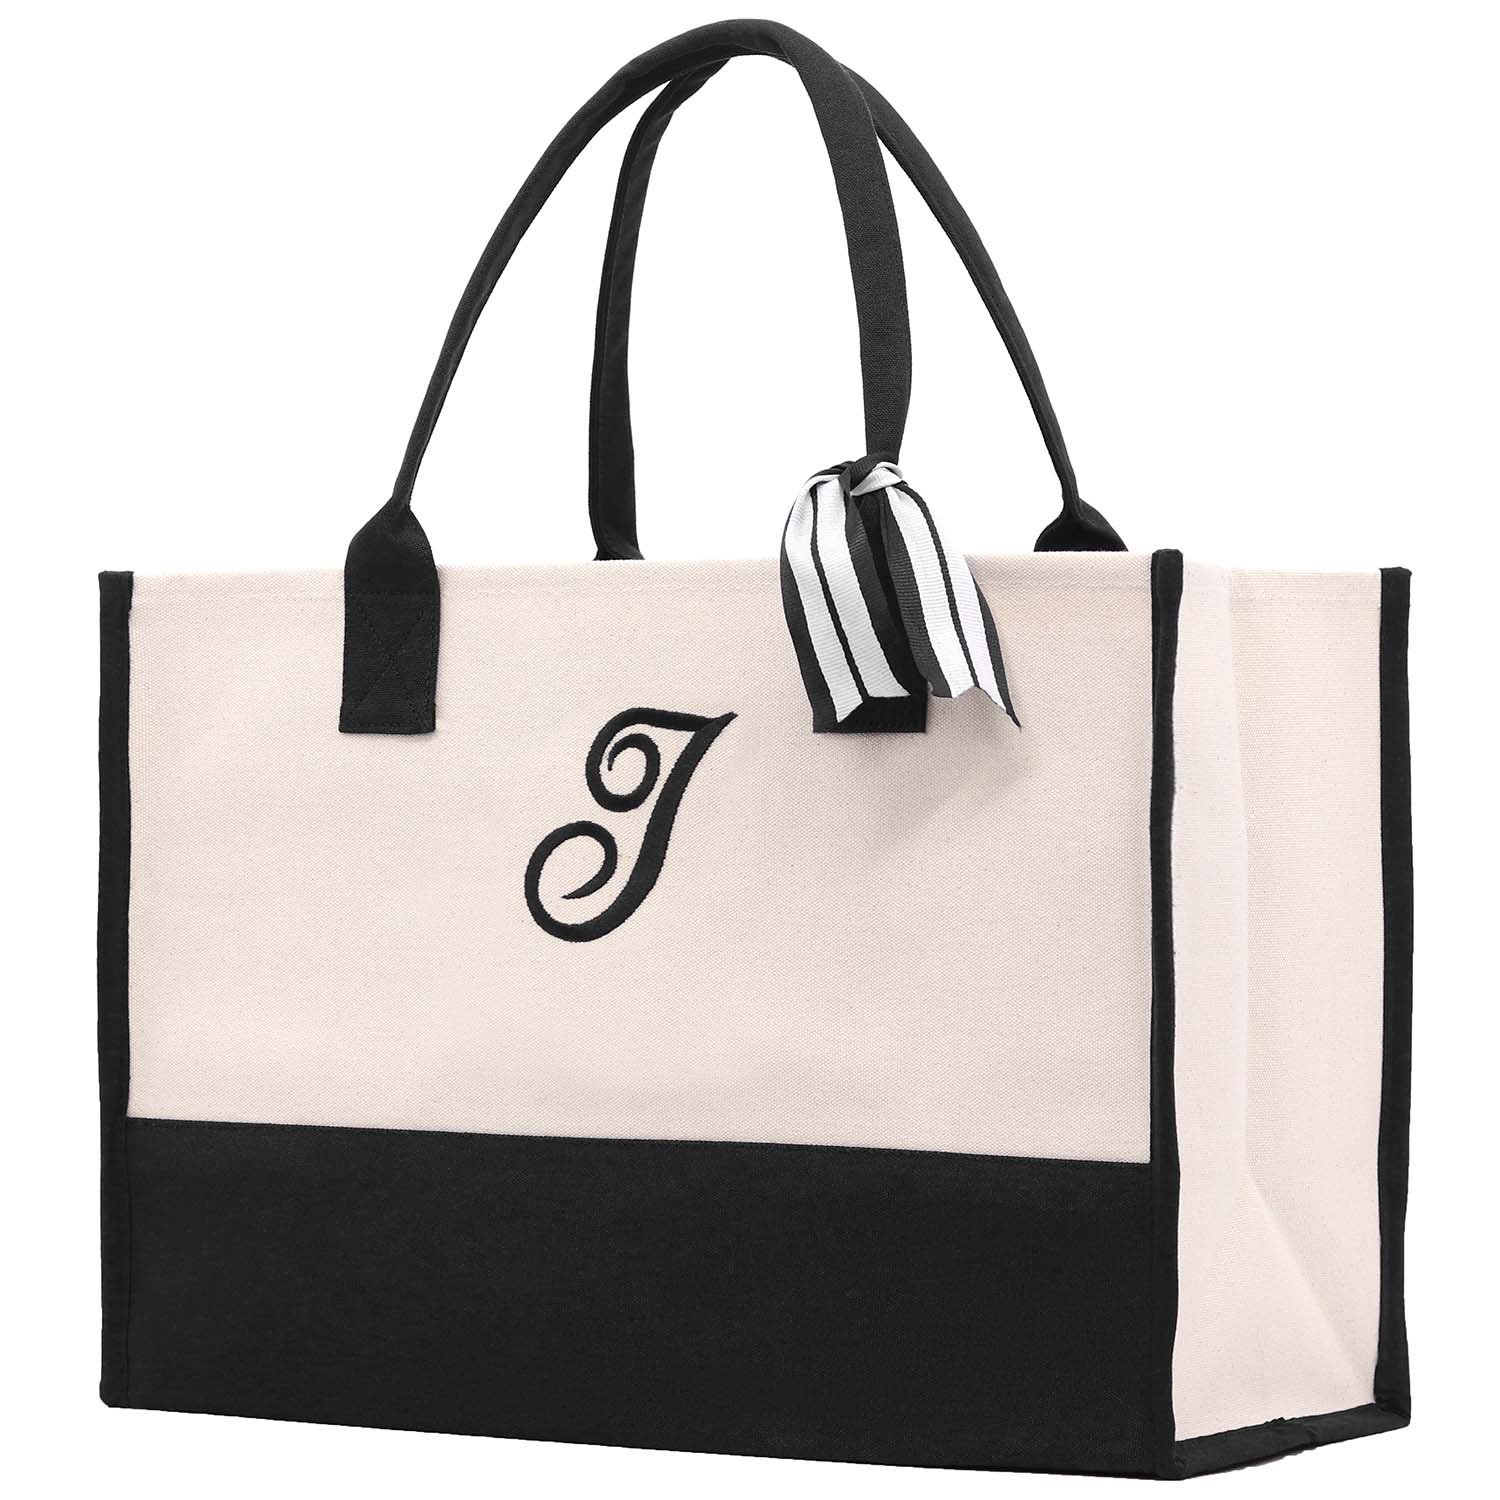 Monogram Tote Bag with 100% Cotton Canvas and a Chic Personalized Monogram (Black - Script Font)